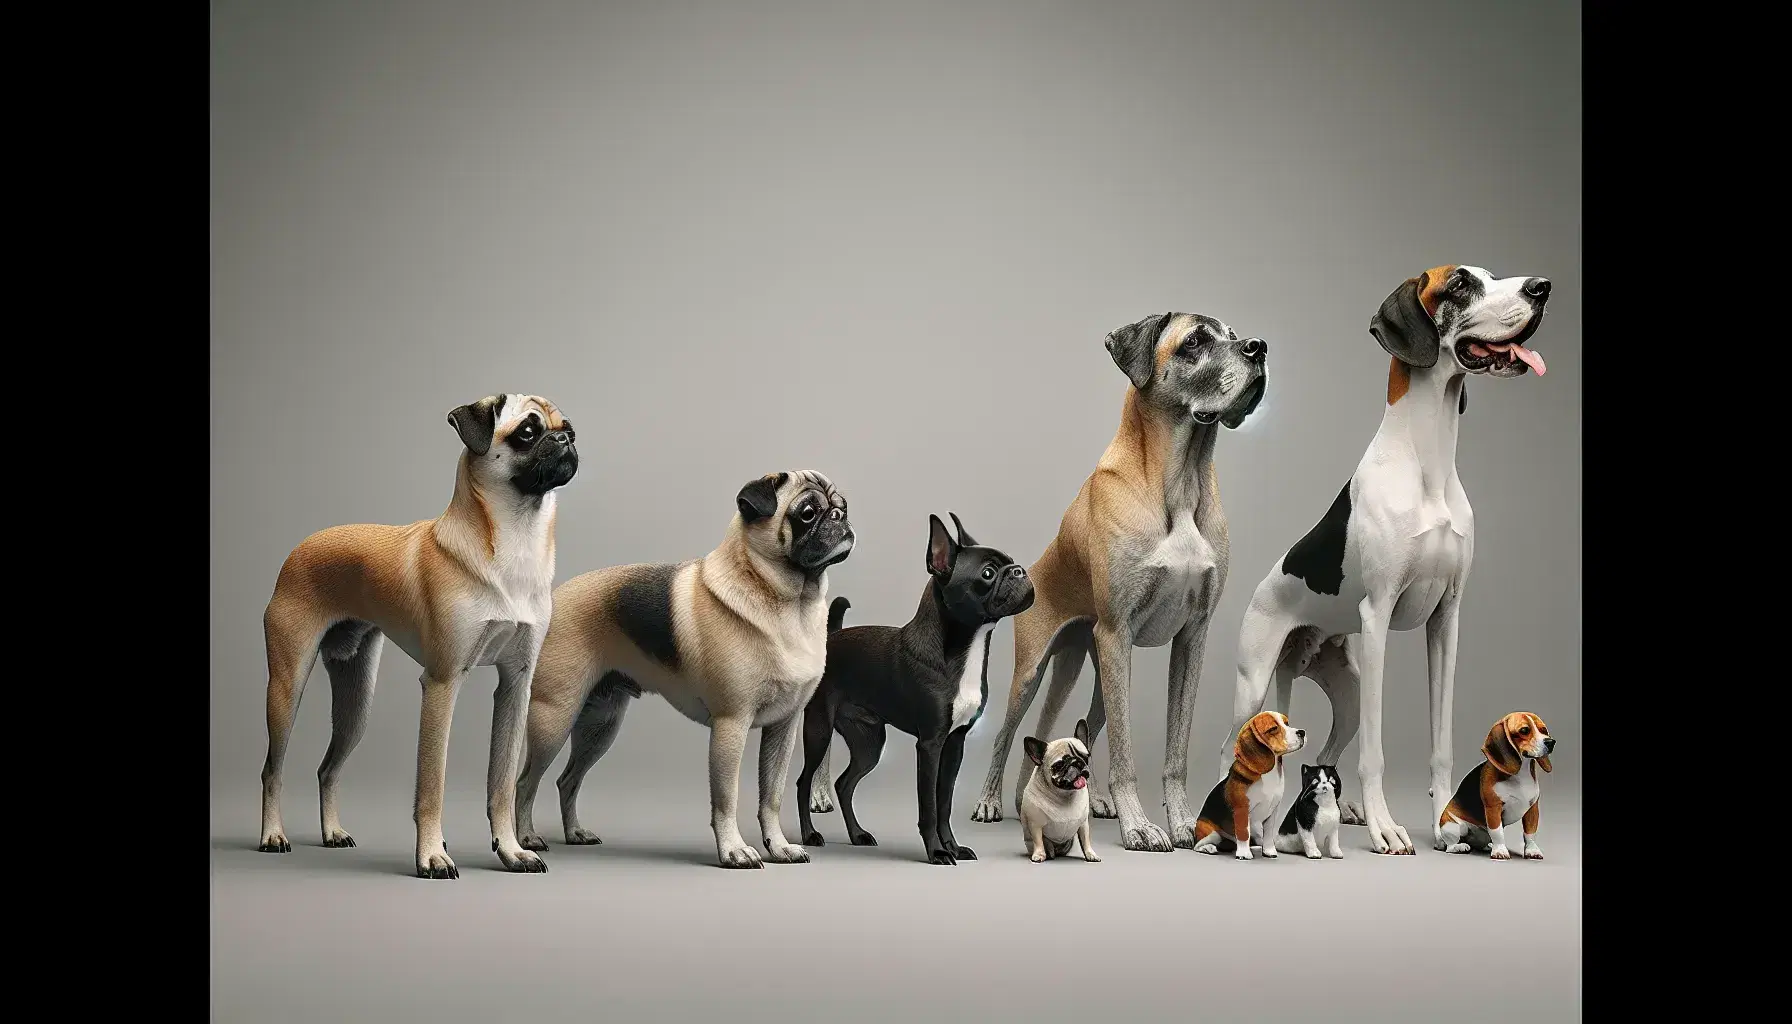 Seven dog breeds lined up by size on a neutral background, from the light brown Chihuahua to the stately gray Great Dane.